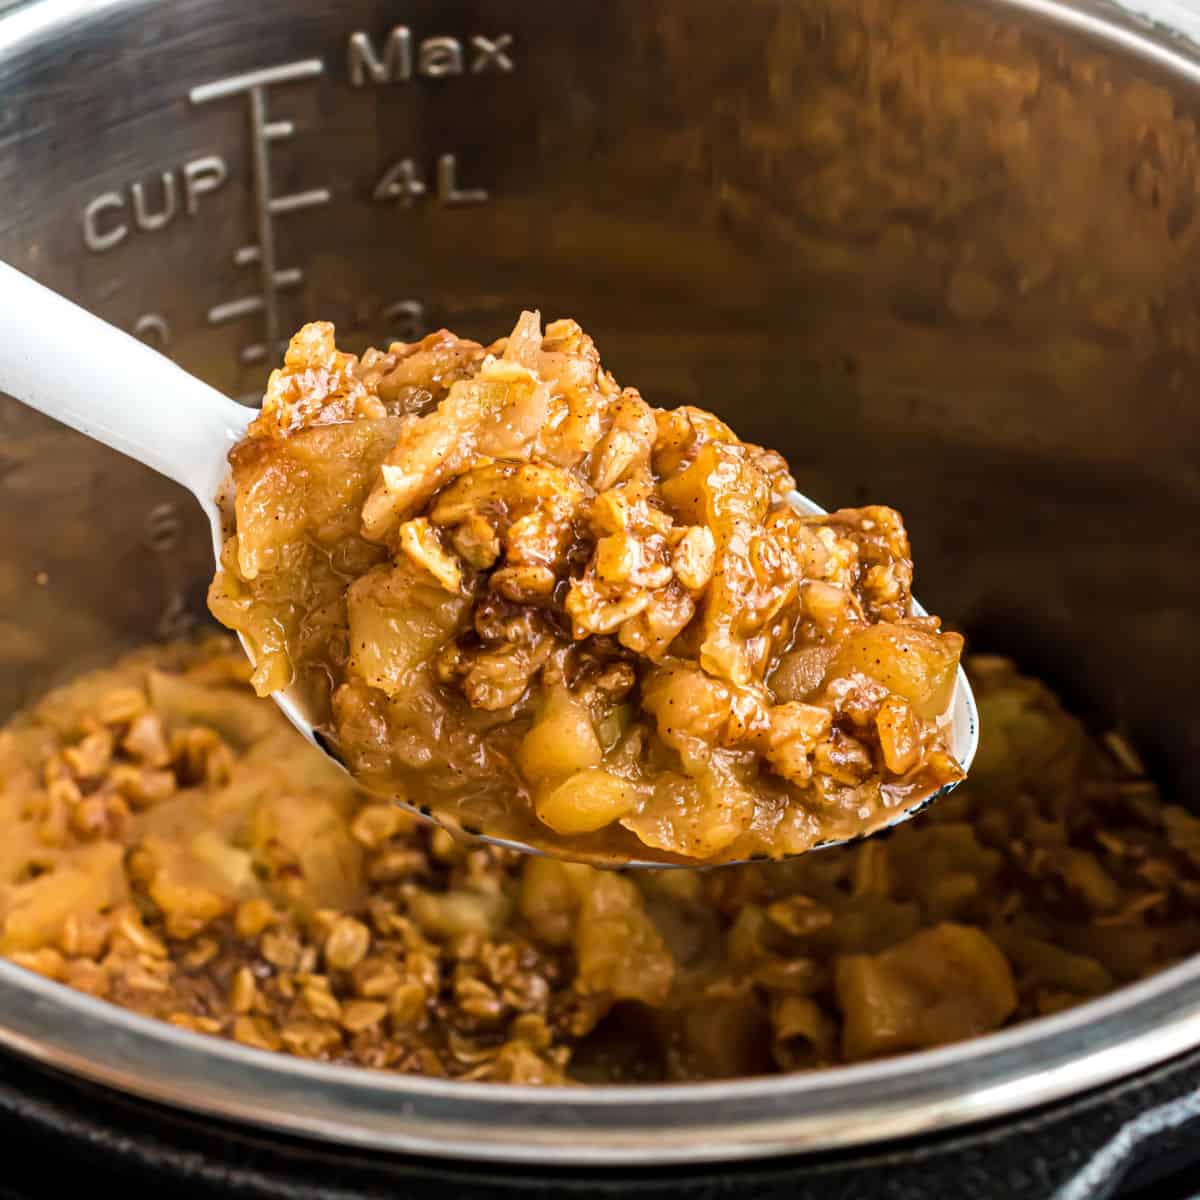 Instant Pot Apple Crisp Recipe that is Ready in Minutes